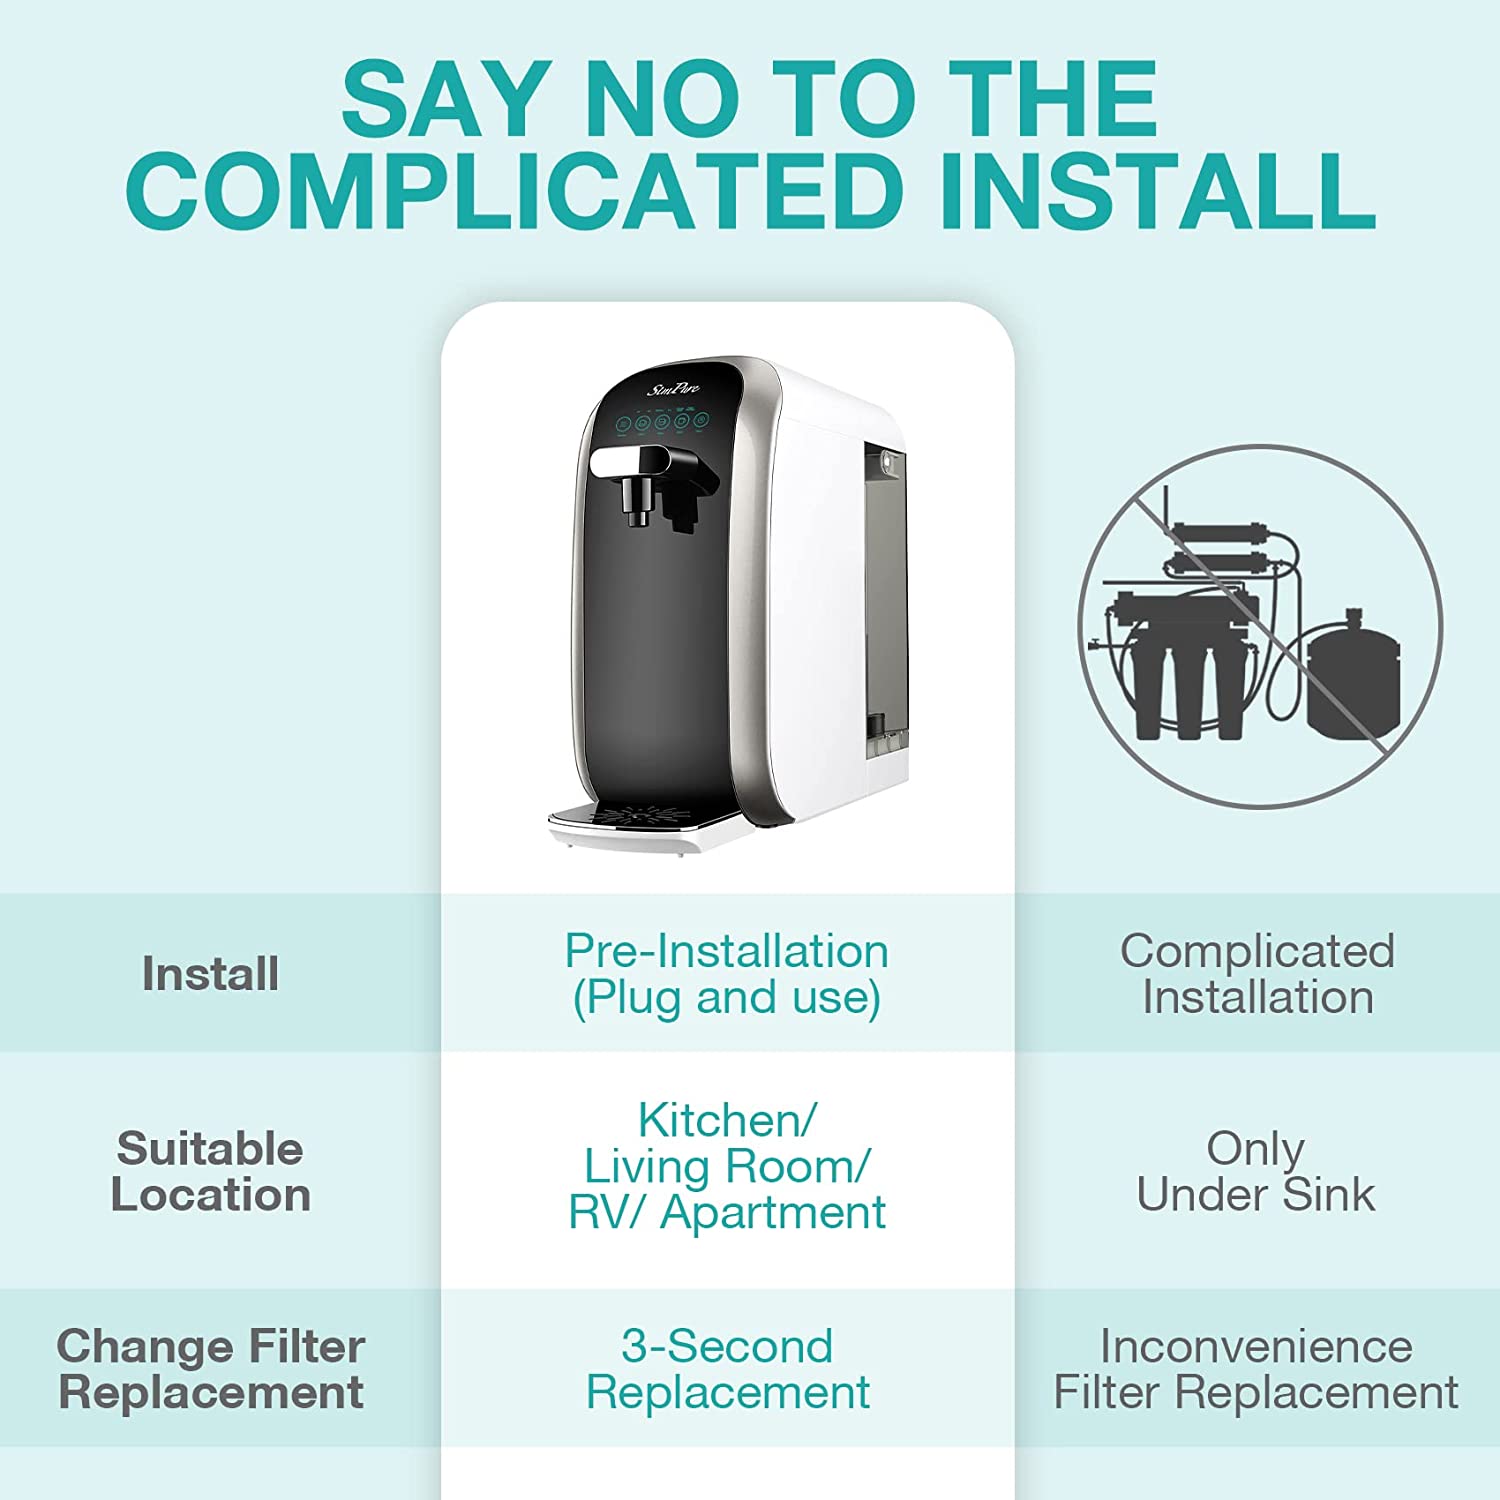 Did you know that RO Water Purifiers can now Save Water